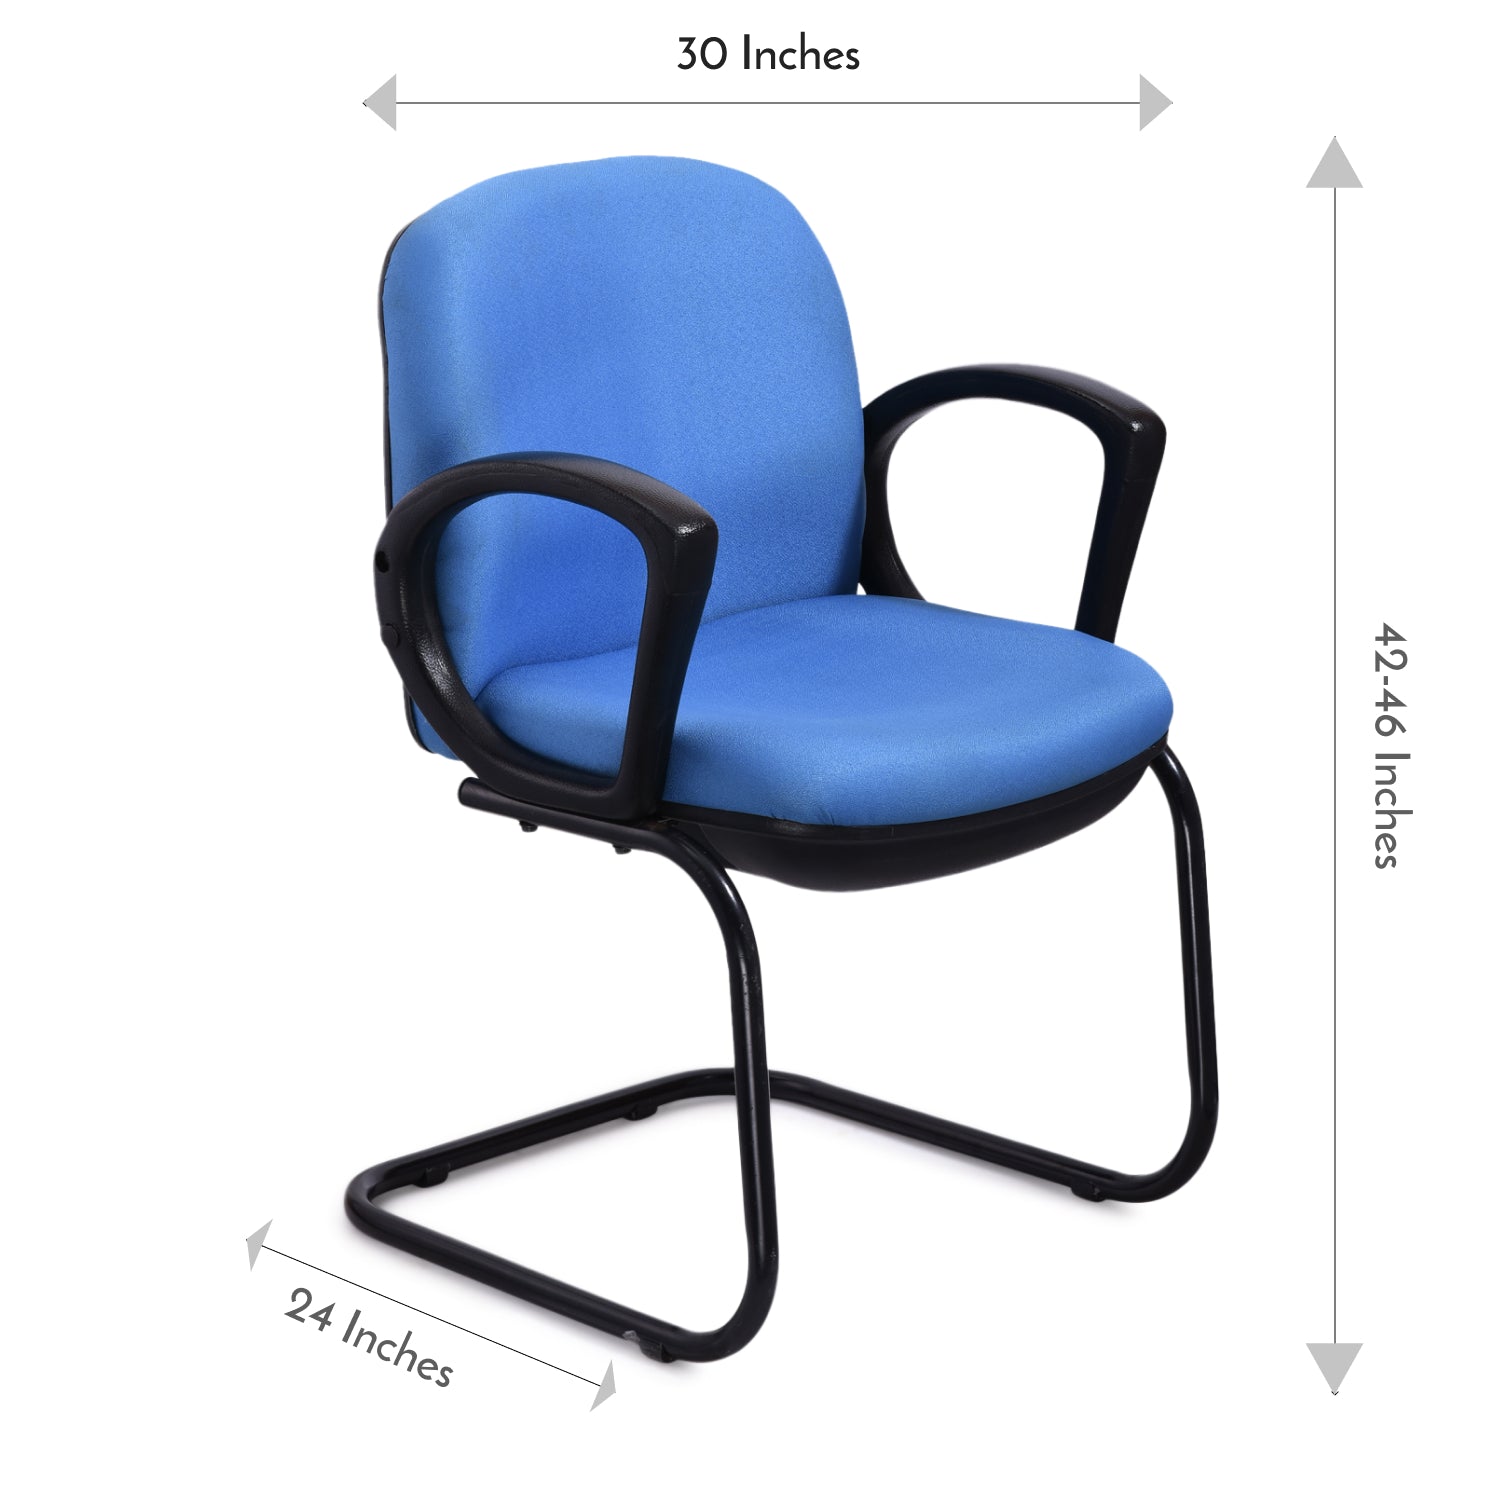 ZSV1028 Medium Back Chair by Zorin in Blue Color Zorin